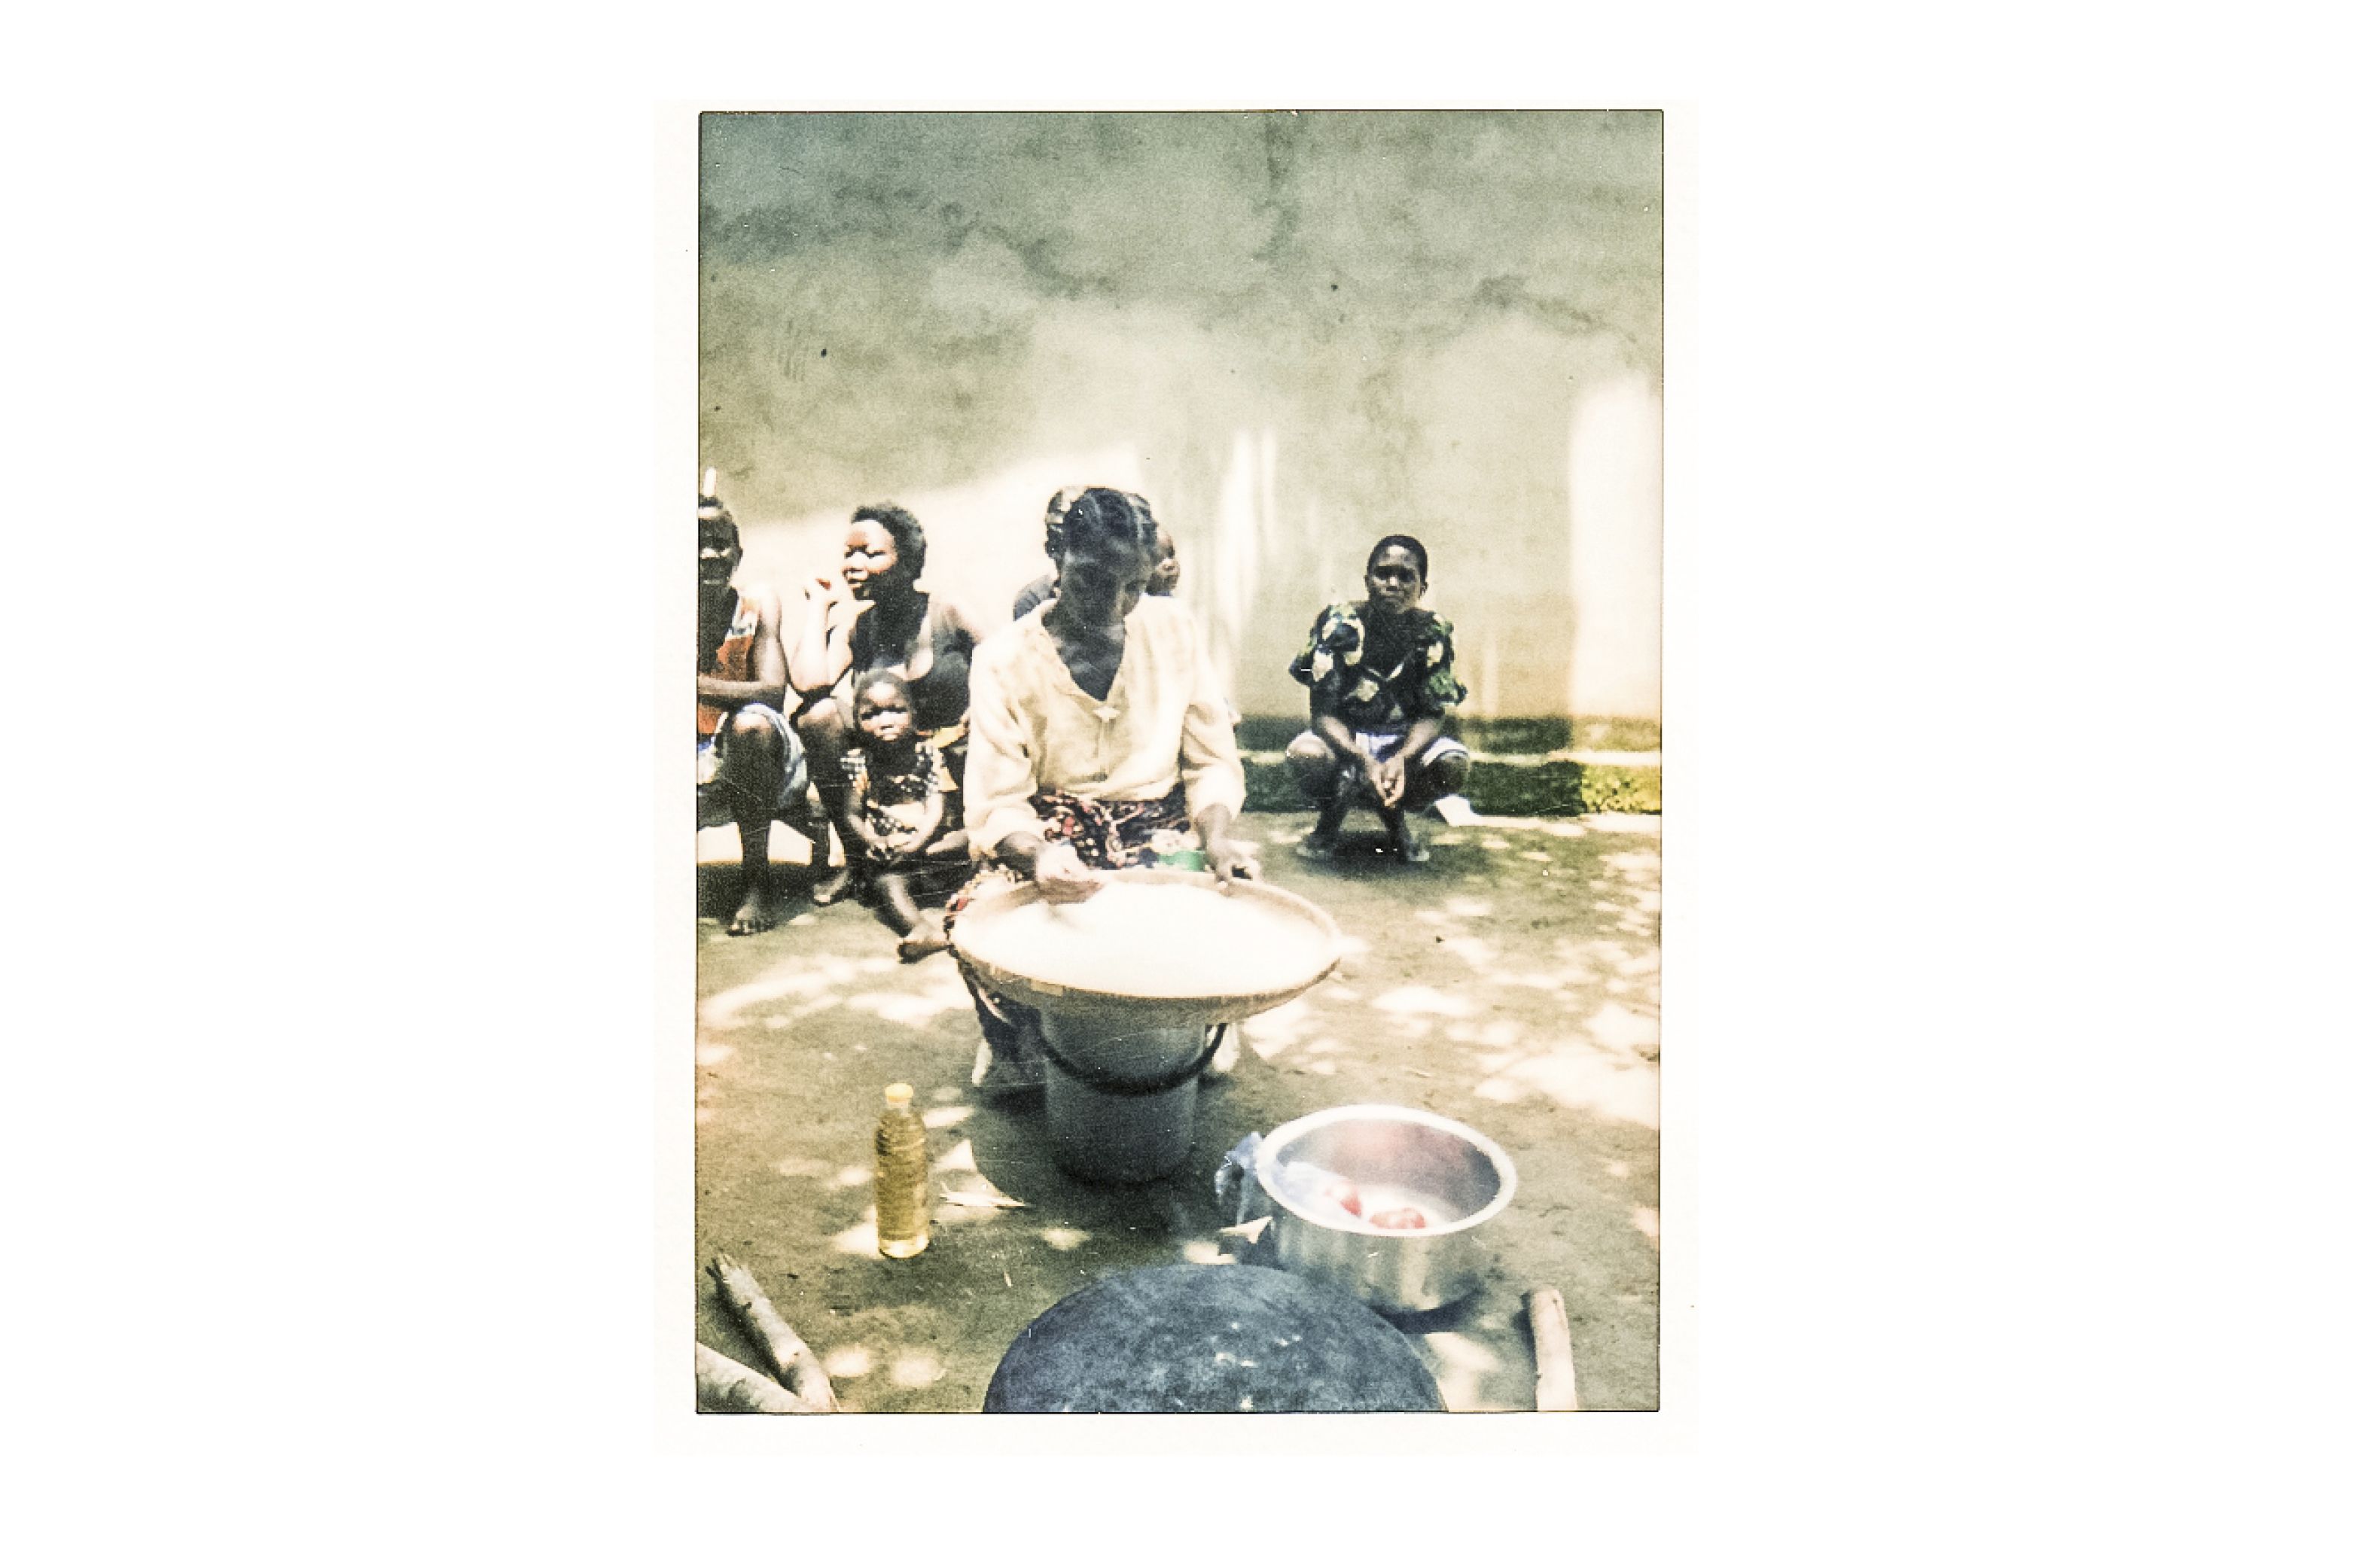 Vanessa Chirwa says that when she is cooking, “The smoke is giving me headaches and pain in my eyes—it makes me cough and I feel a burning sensation in my chest." Image by Nathalie Bertrams. Malawi, 2017.